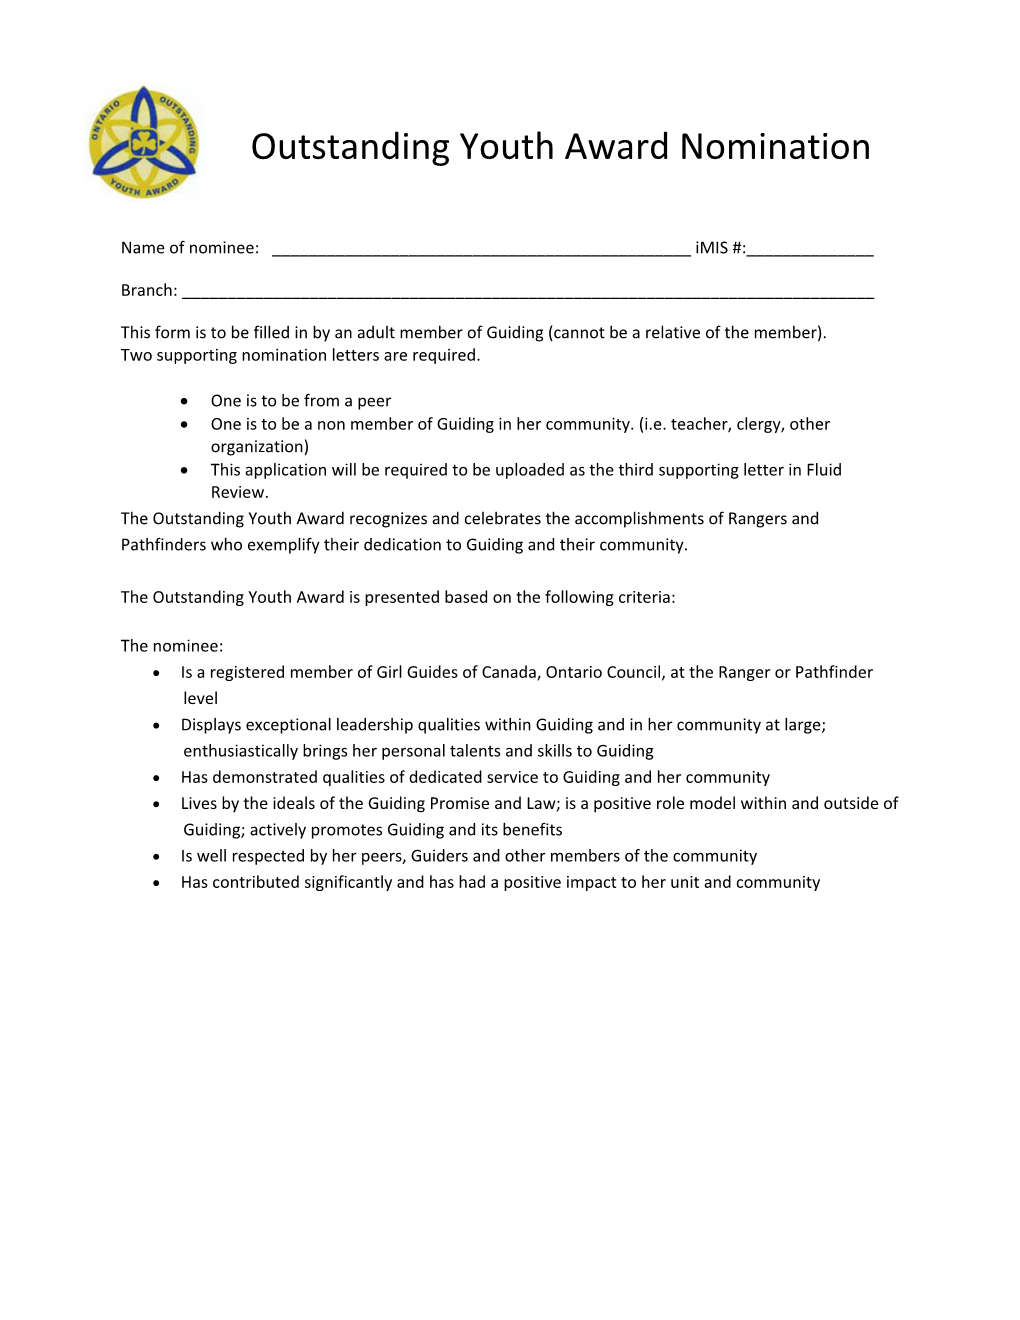 Outstanding Youth Award Nomination